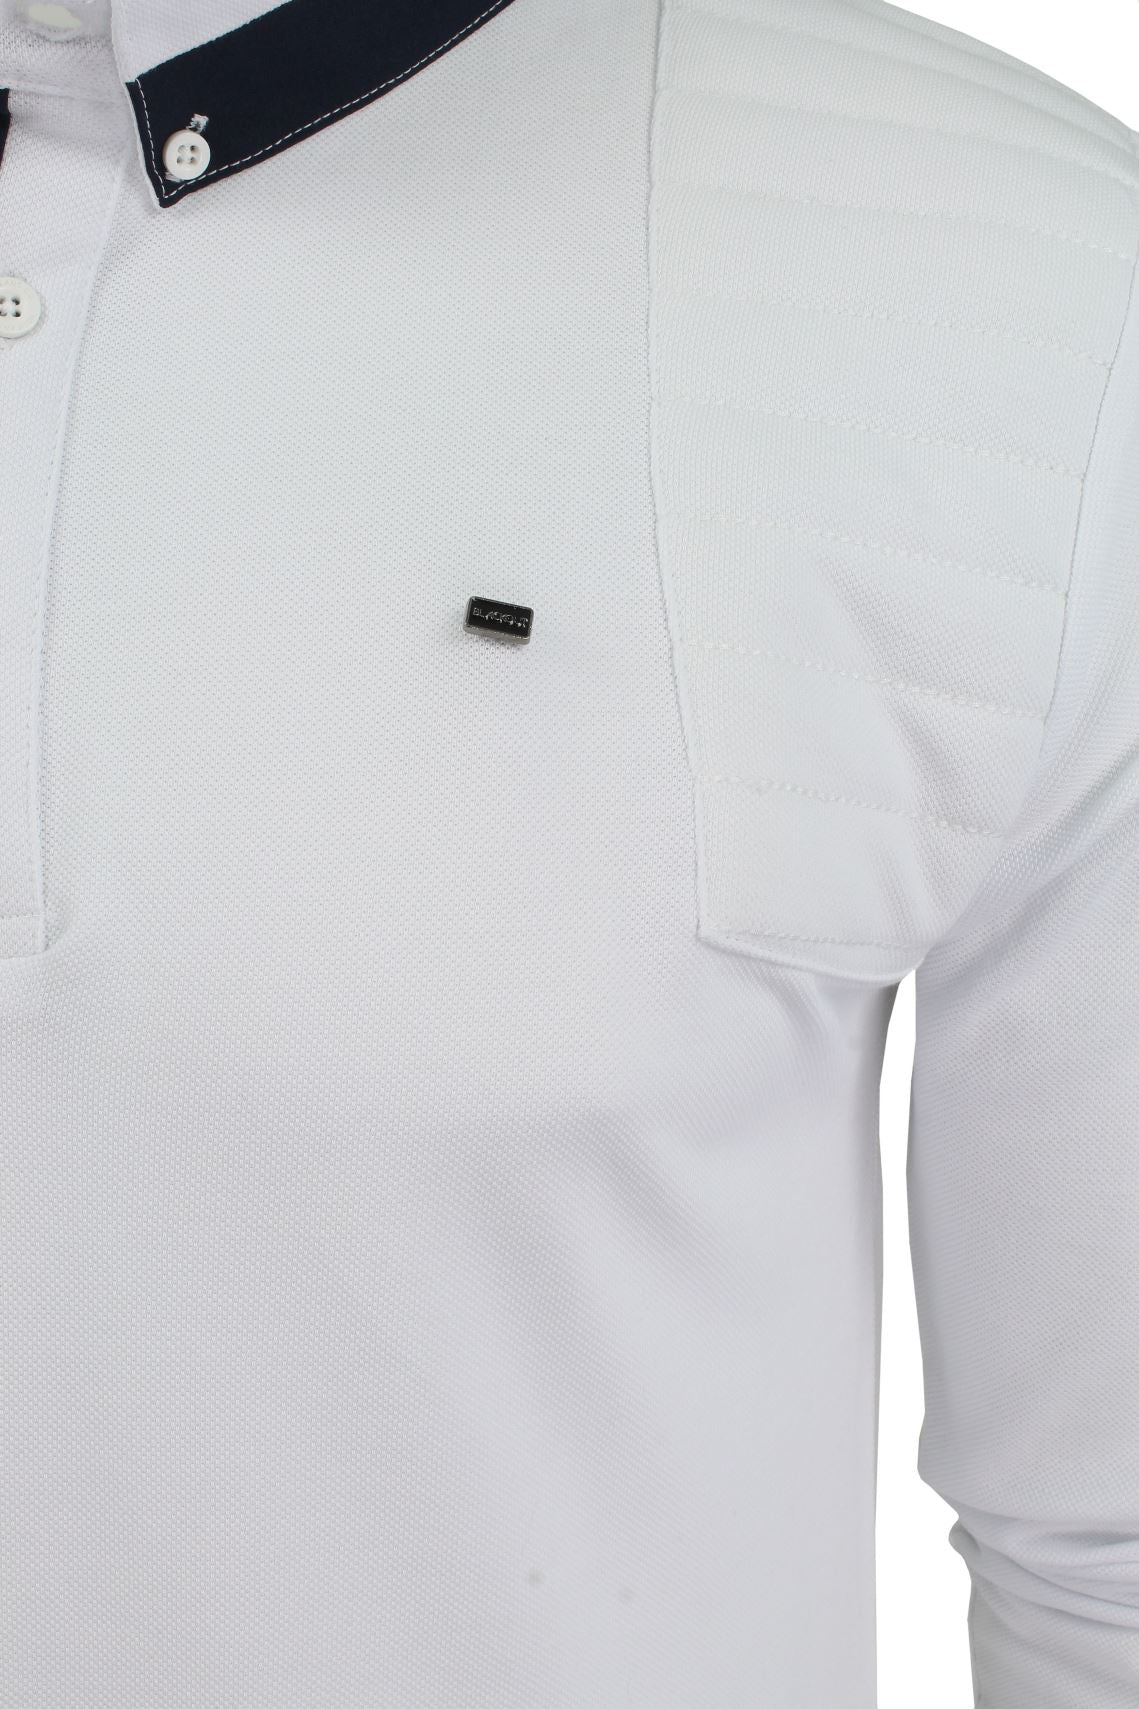 Mens Short Sleeved Polo Shirt from the Blackout Collection by Voi Jeans, 02, Dubb, Cole - White